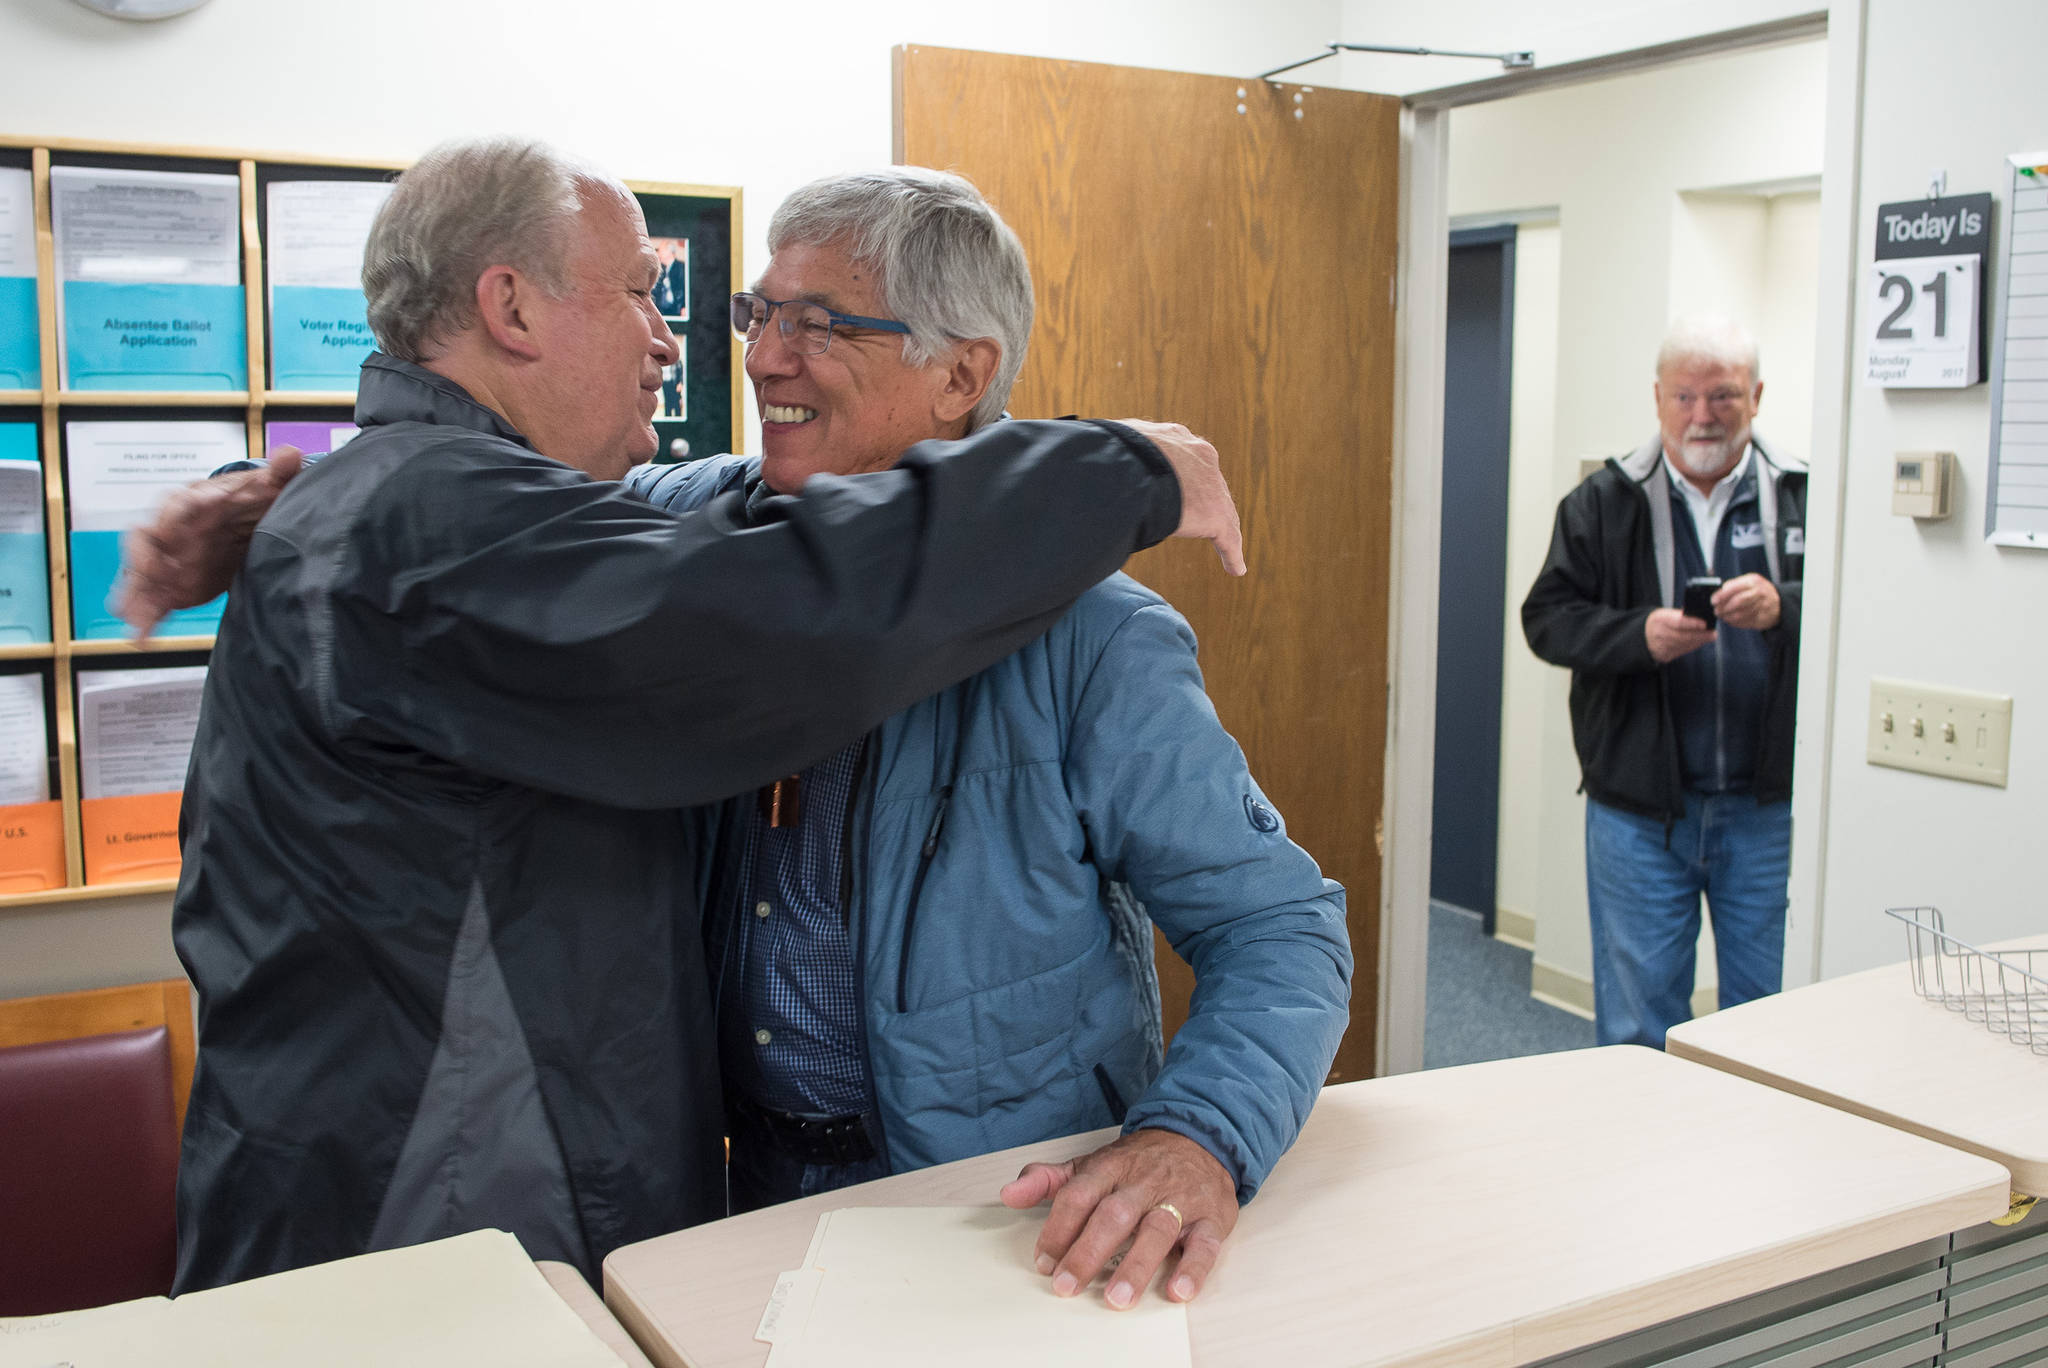 Gov. Bill Walker and Lt. Gov. Byron Mallott embrace after filing for re-election at the state’s election office in Juneau on Monday, Aug. 21, 2017. Former Juneau Mayor and state attorney general Bruce Botelho, right, watched the pair file.